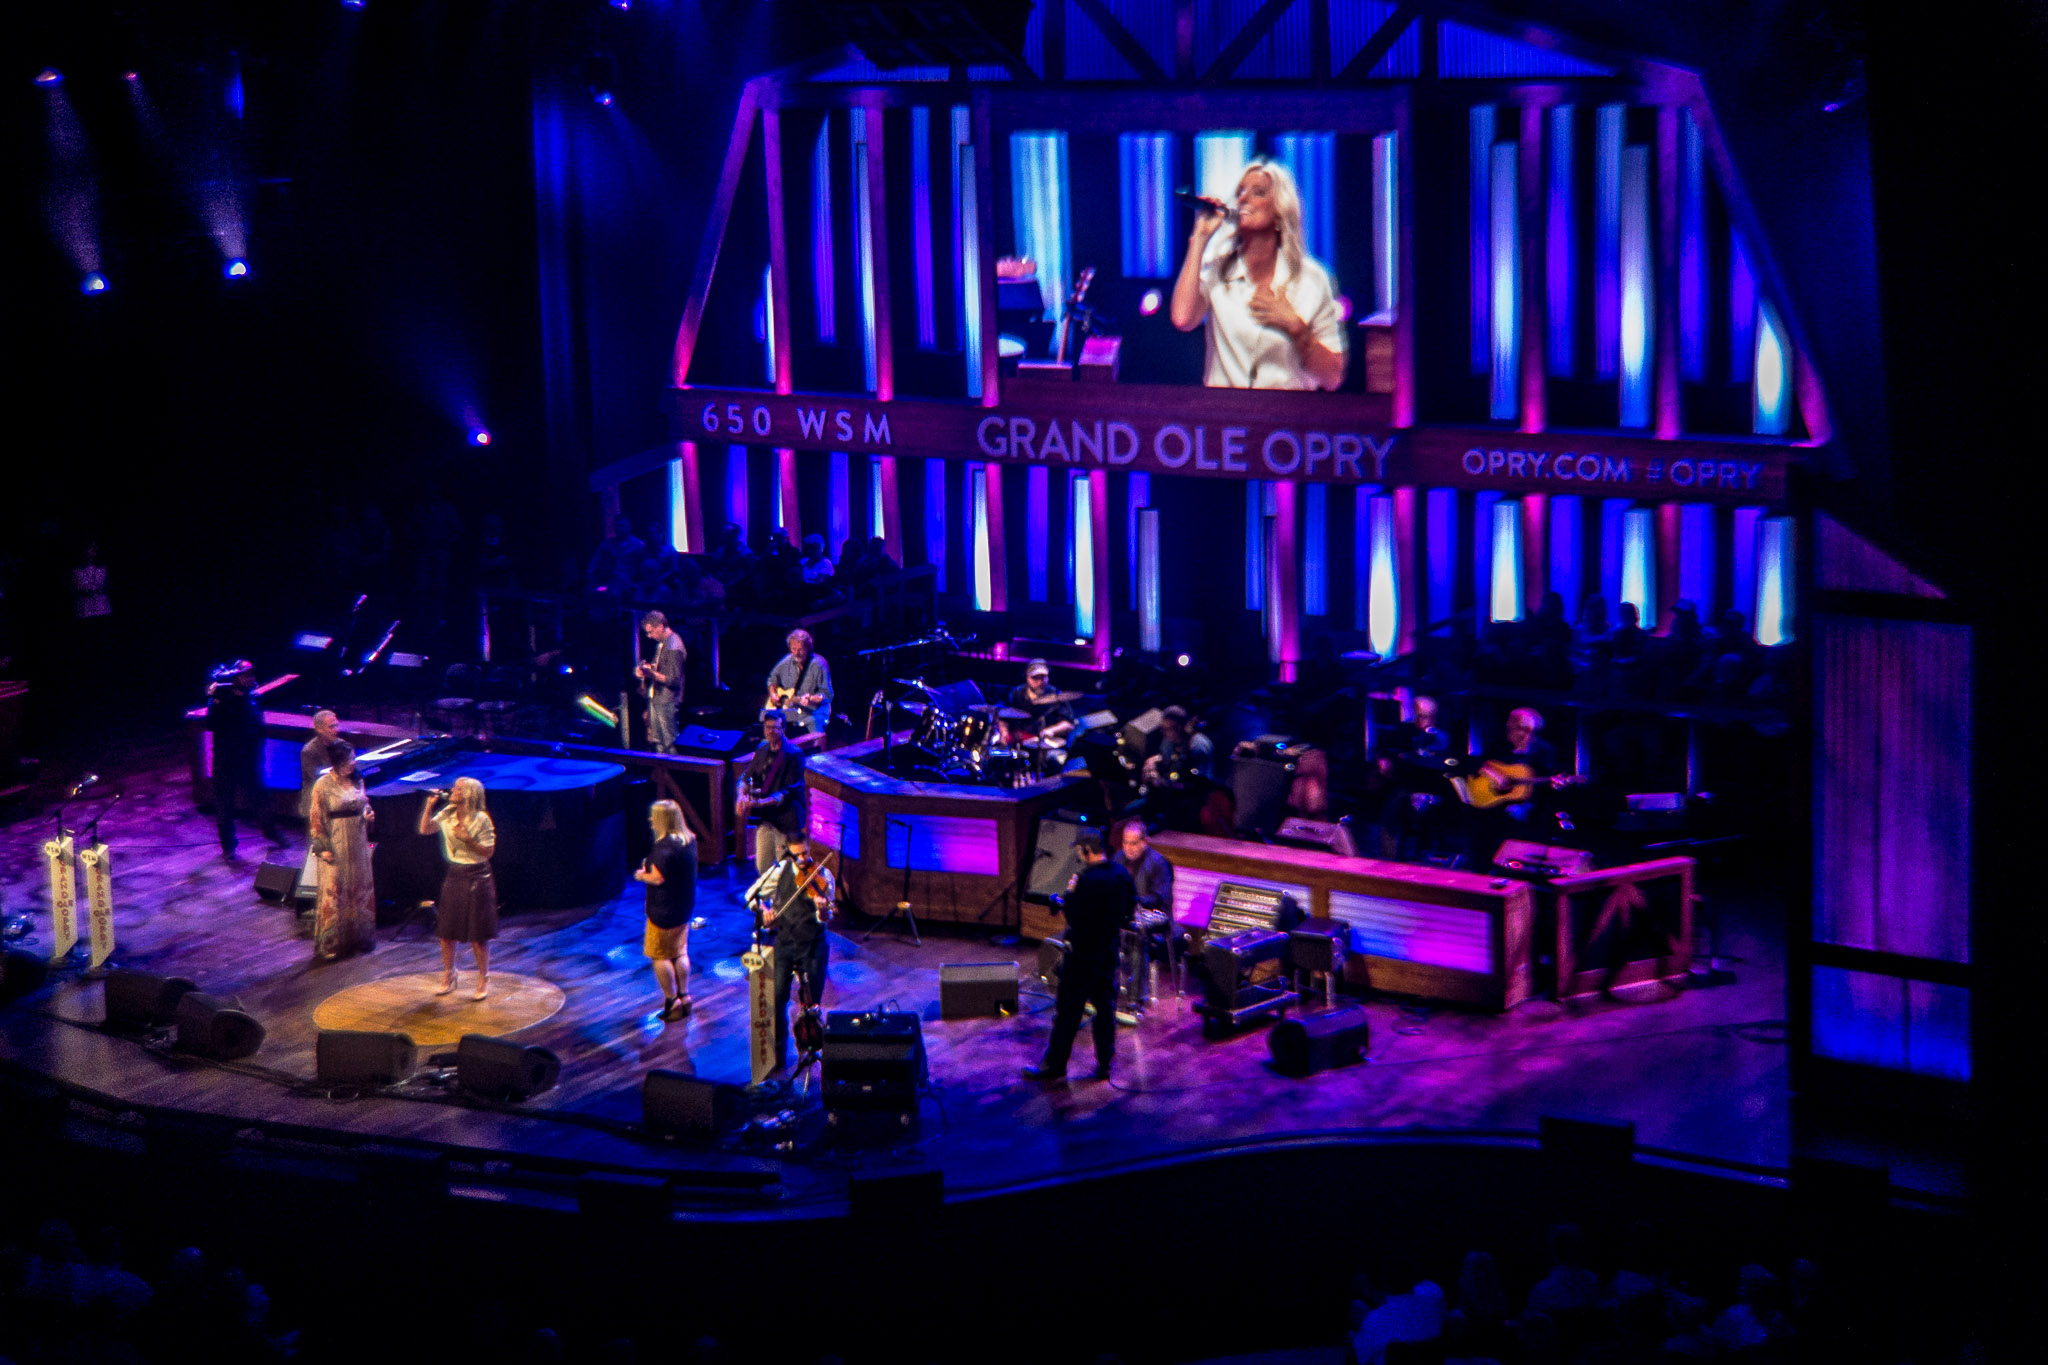 Artists Taking the Stage at the Grand Ole Opry House